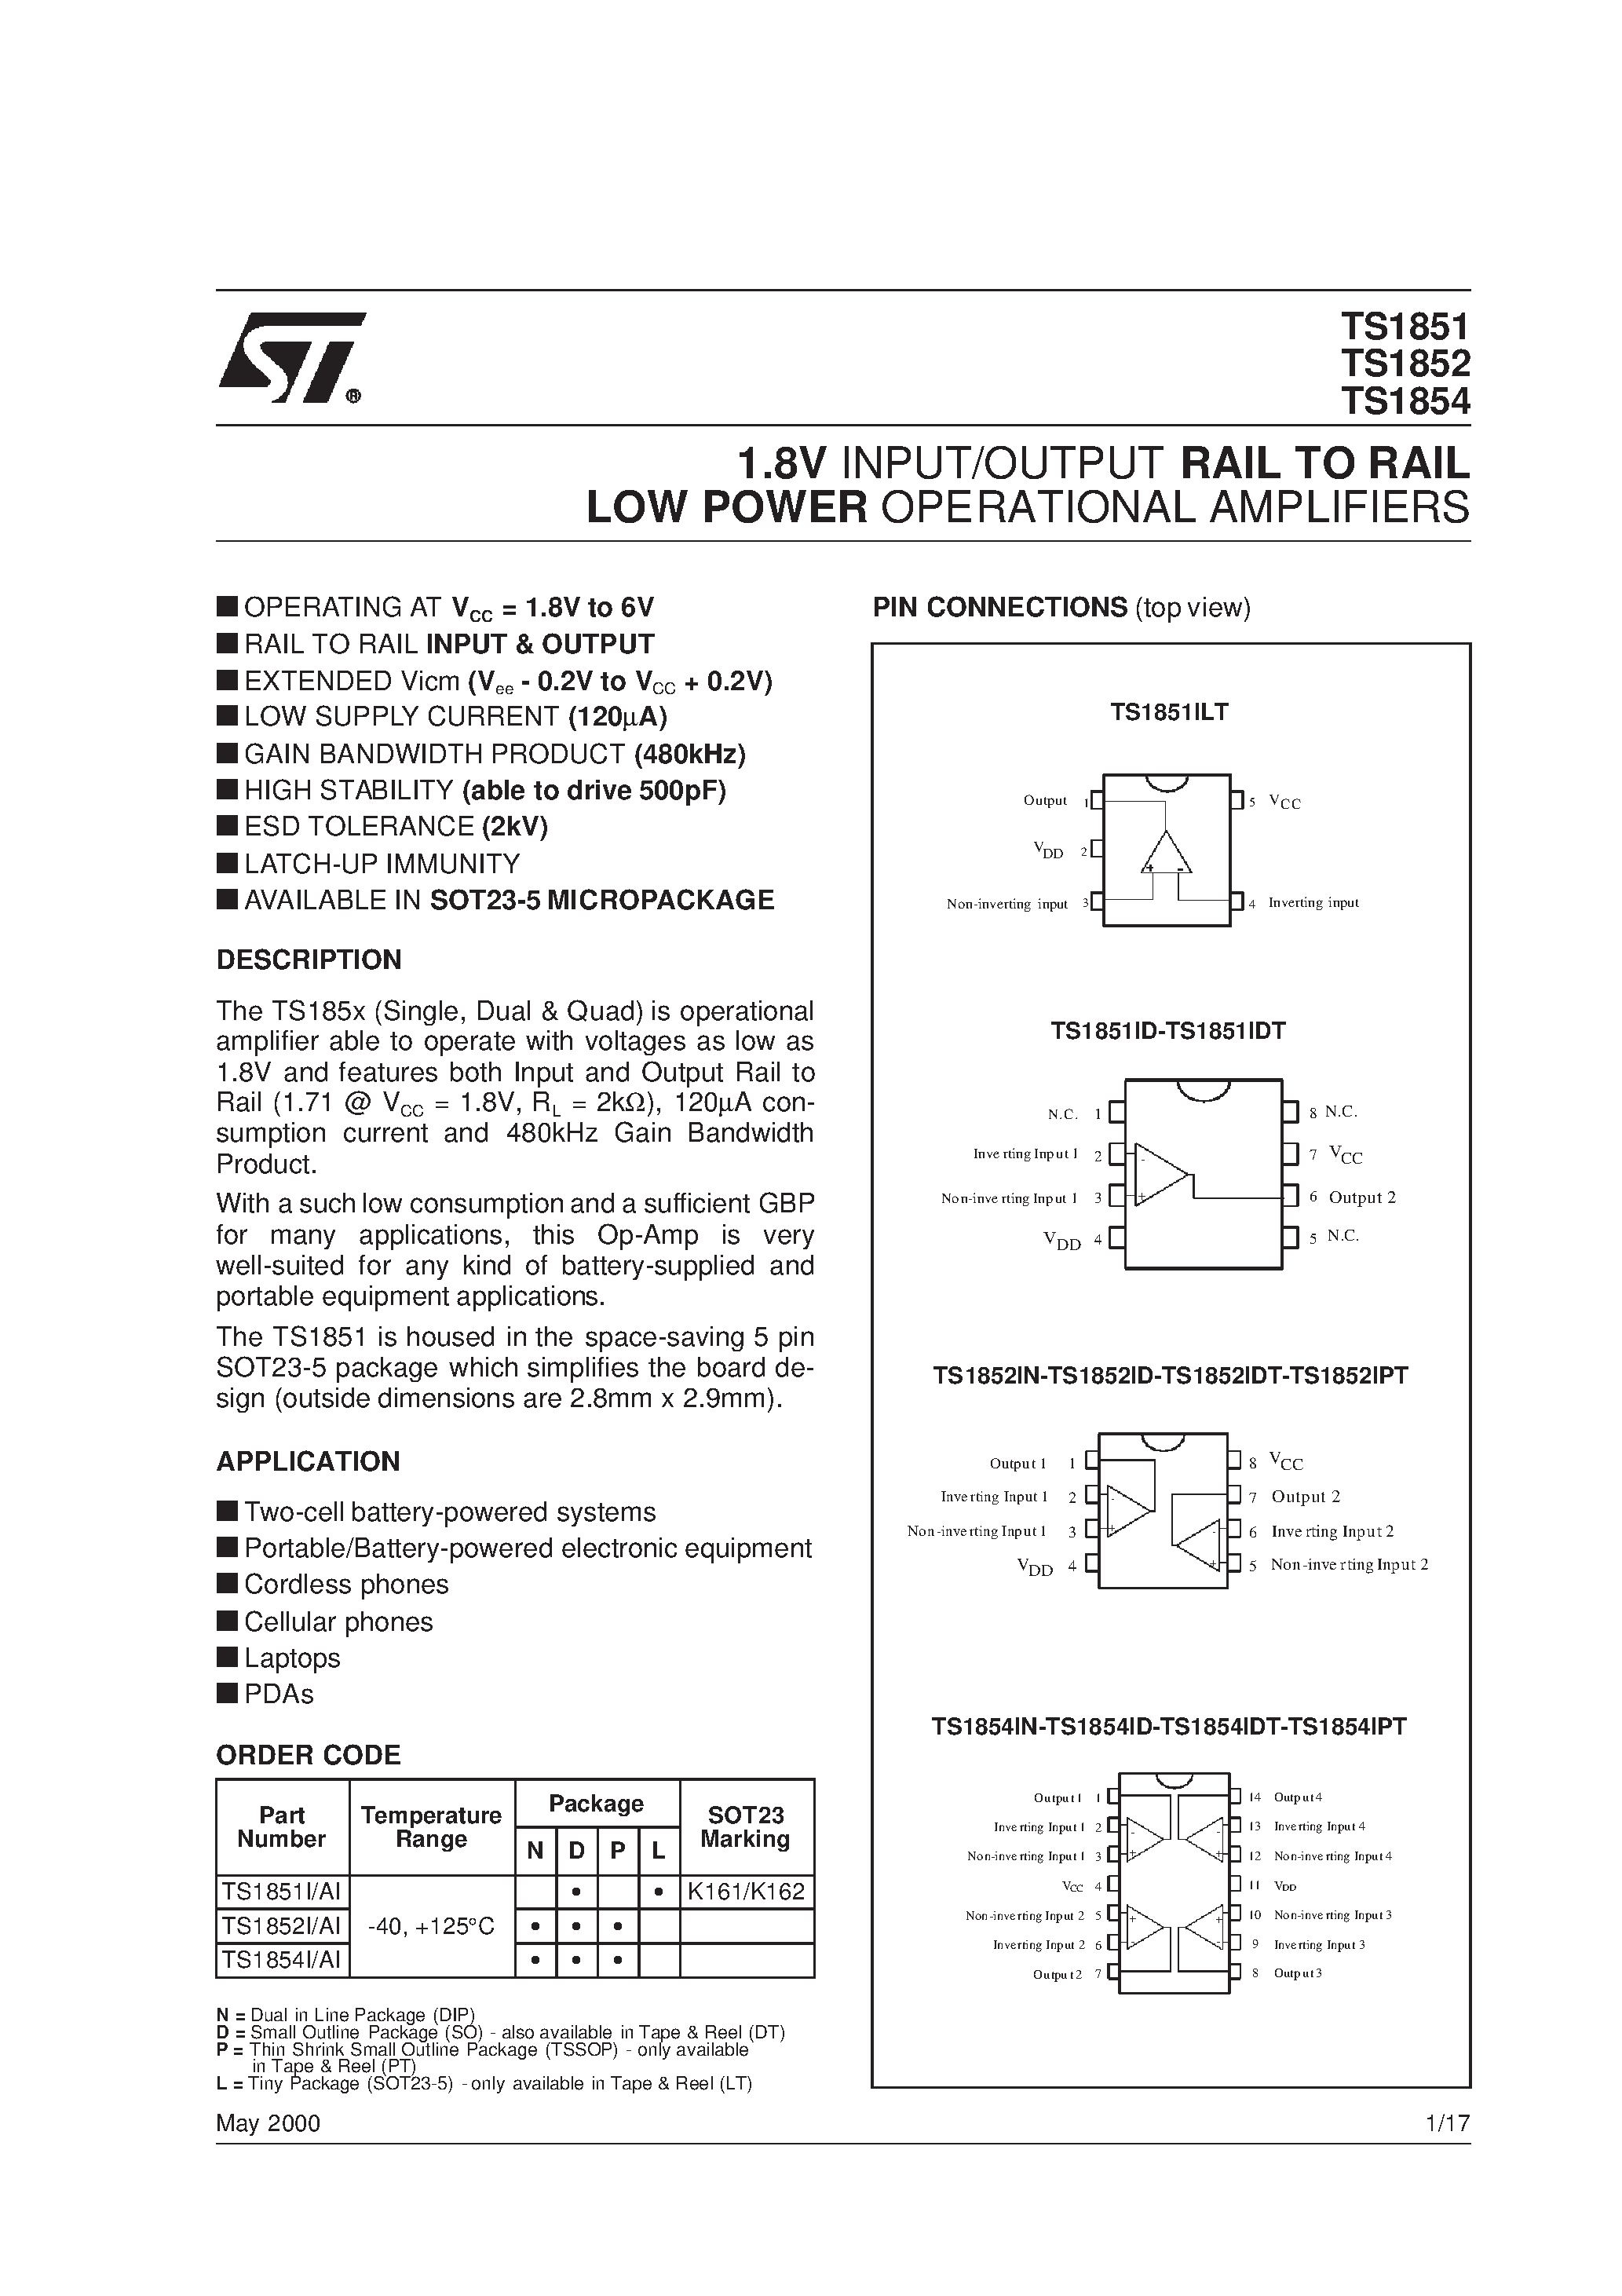 Datasheet TS1852I - 1.8V INPUT/OUTPUT RAIL TO RAIL LOW POWER OPERATIONAL AMPLIFIERS page 1